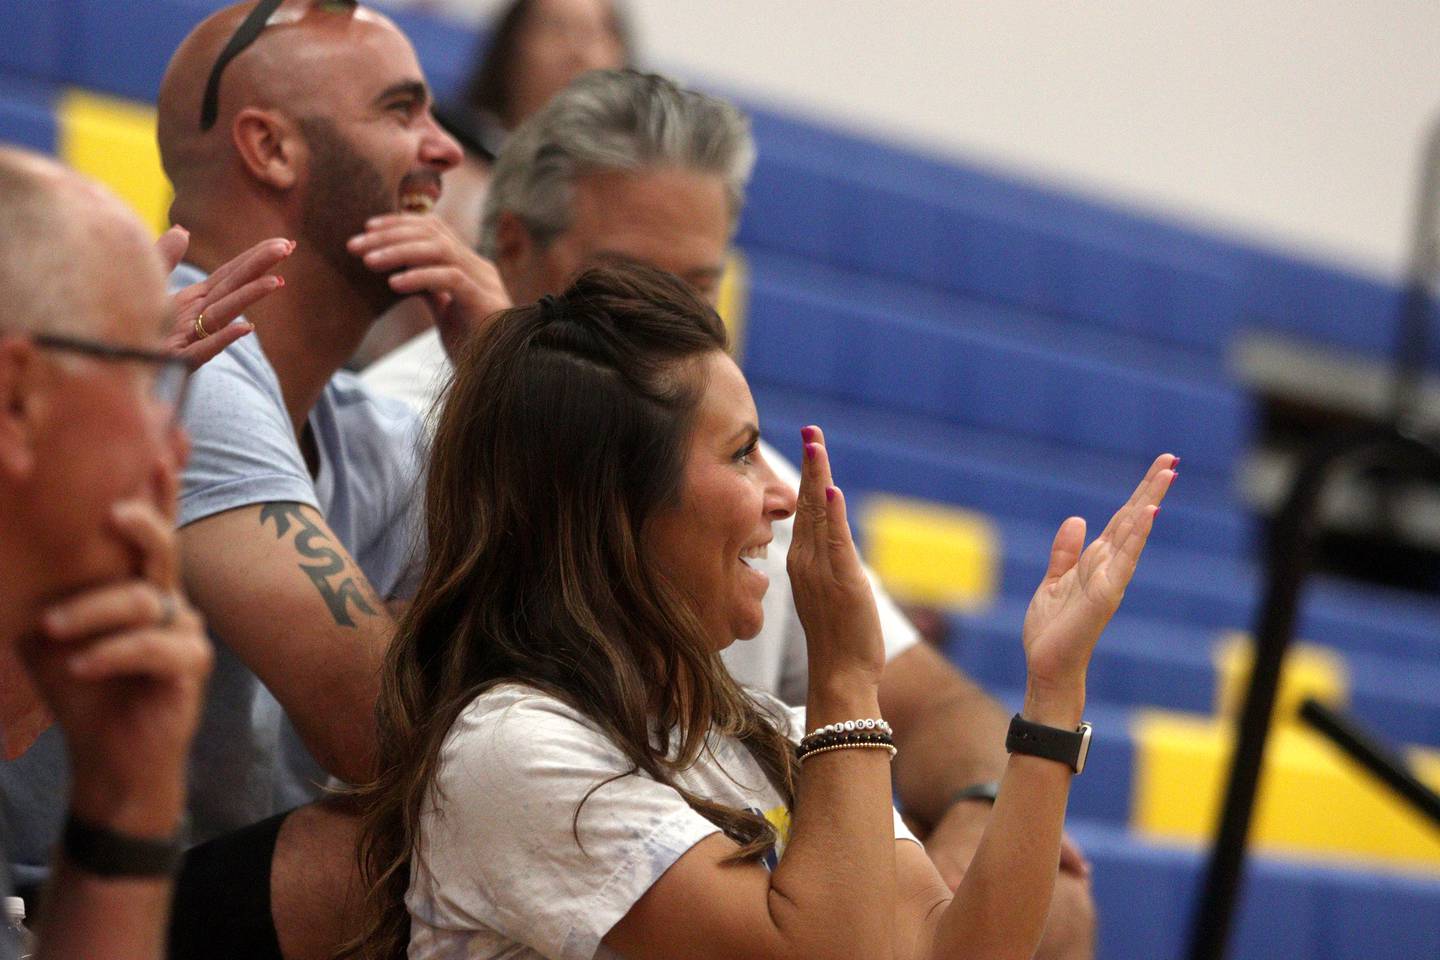 Matt, top, and Amber Werderitch enjoy the action during an alumni basketball game at Johnsburg High School Saturday evening to benefit their family. Their son Jackson Werderitch, 10, was struck by a car and injured.